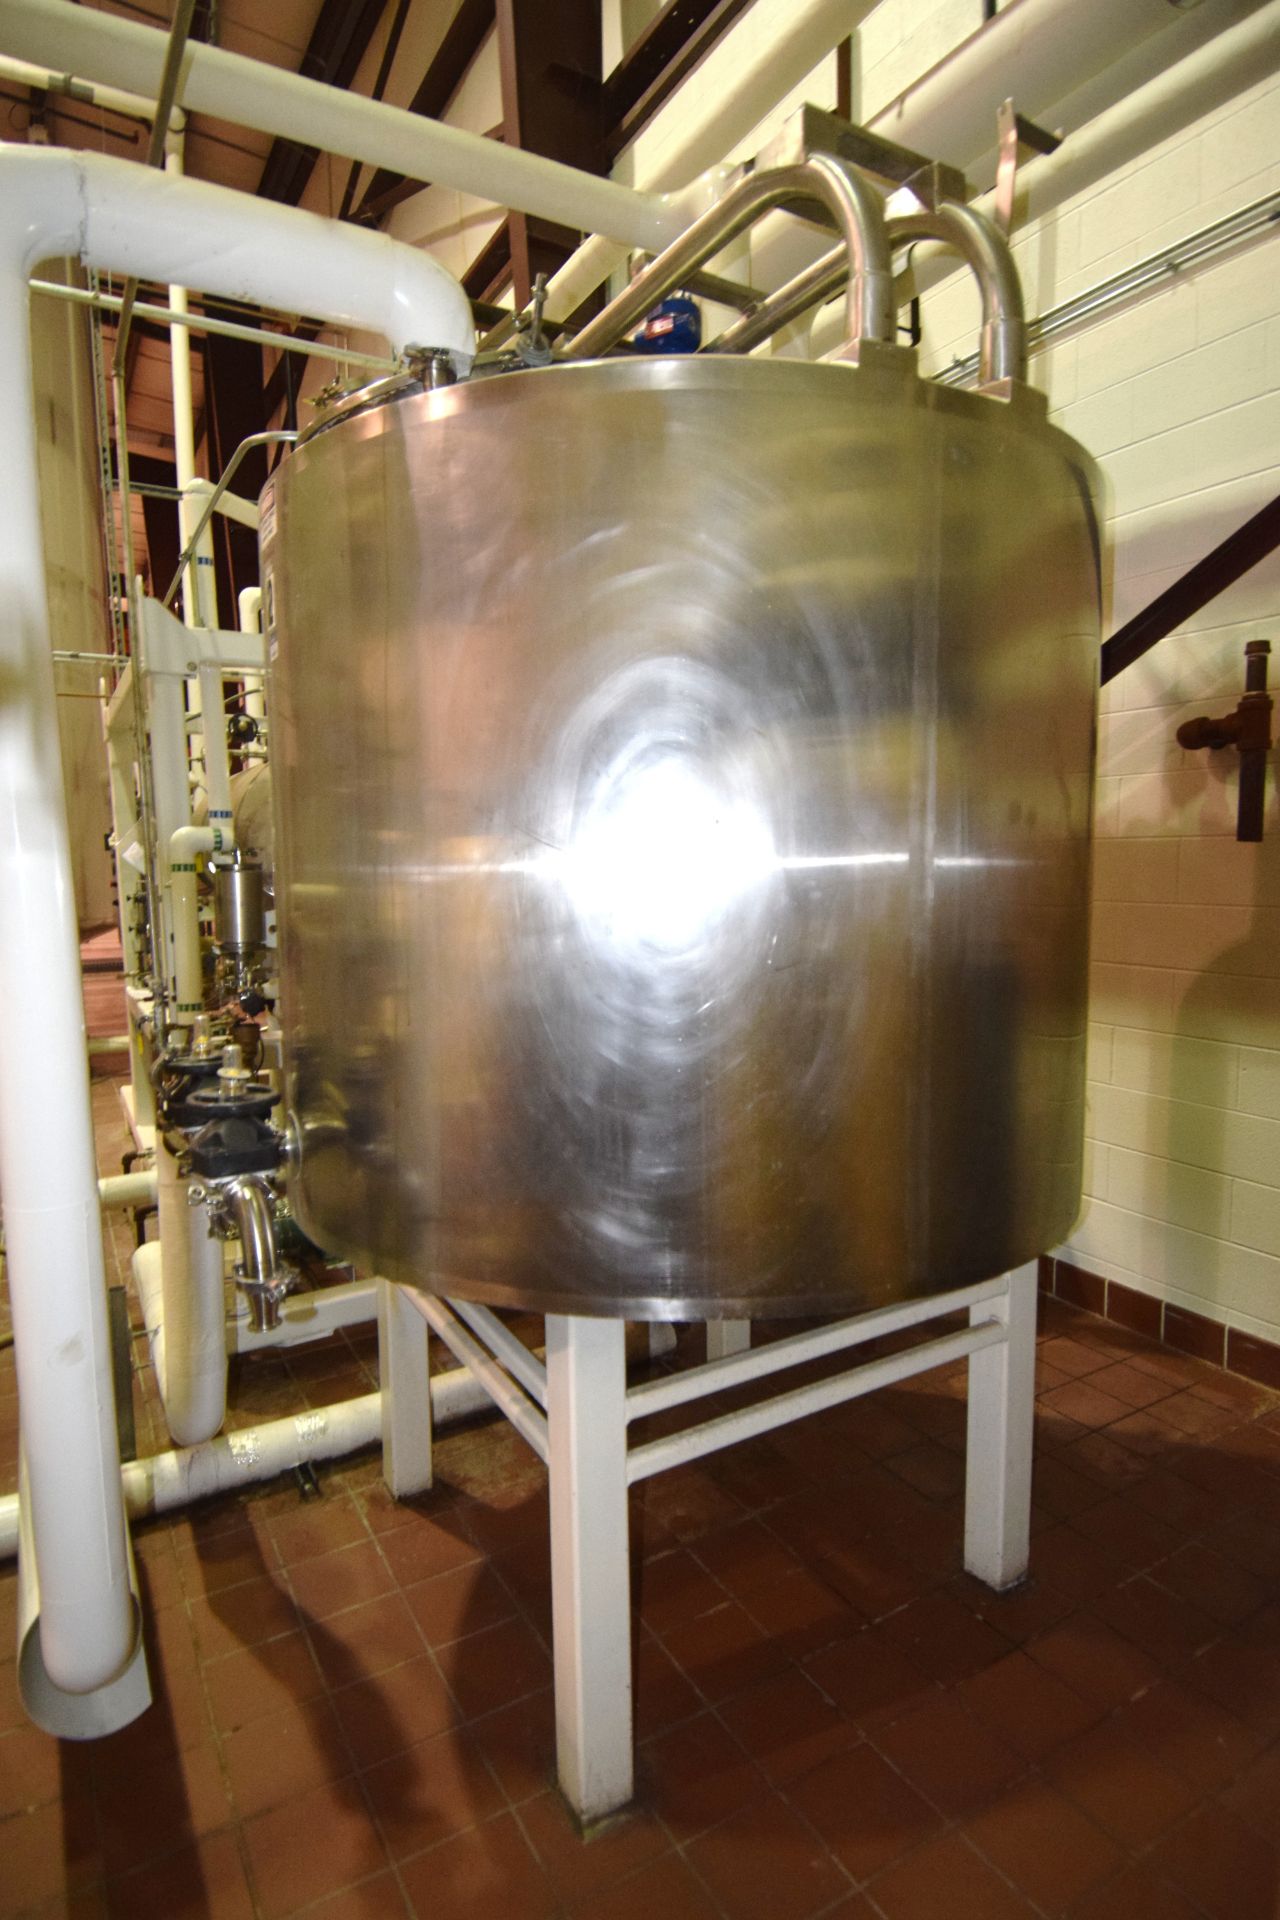 Damrow Kettle, Approximate 500 Gallon, Stainless Steel. Approximate 60 in. diameter x 46 in. deep, - Image 3 of 9